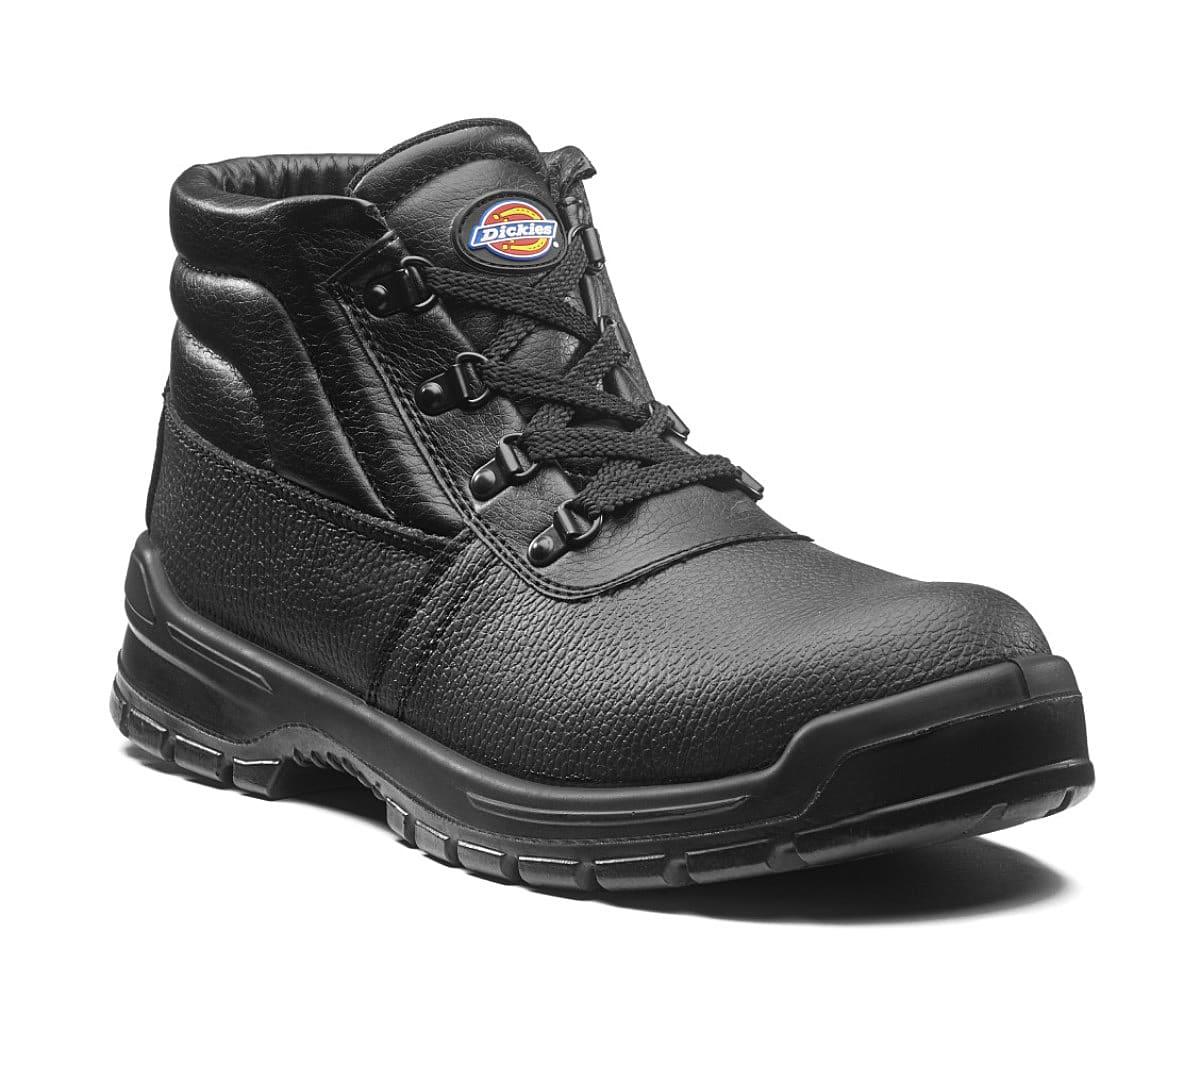 Dickies Redland II Safety Boots in Black (Product Code: FA23330A)